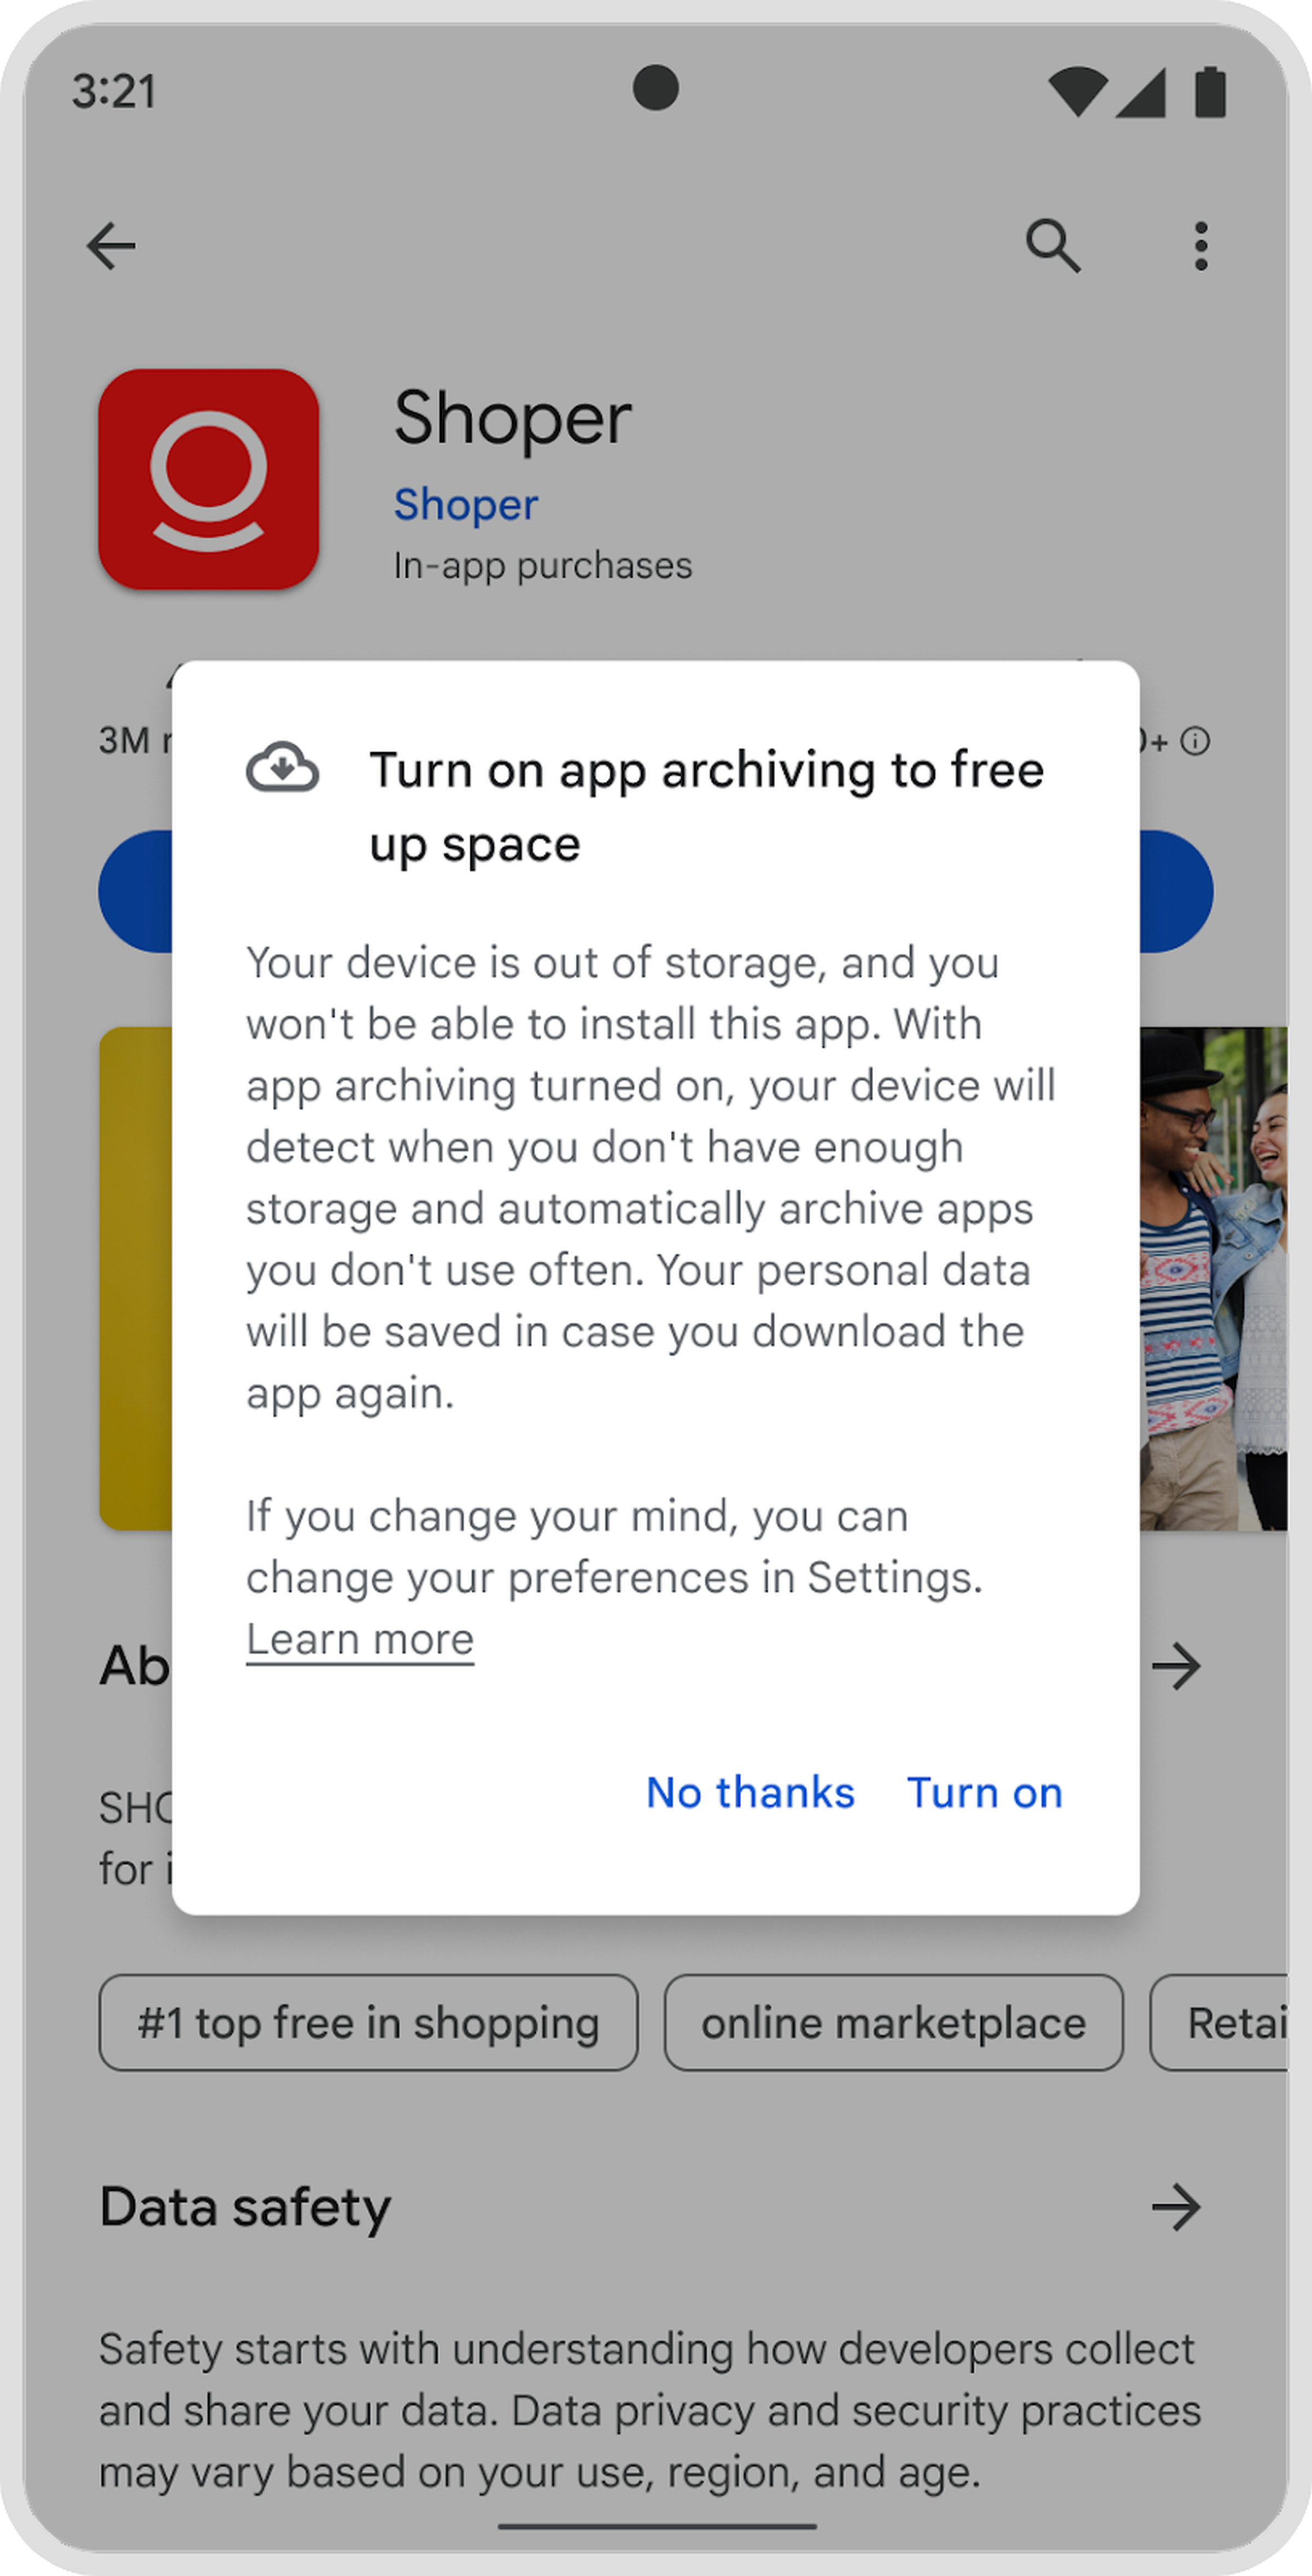 A pop-up message appears on the Google Play store. The message asks users to enable the app archiving feature and includes a disclaimer that the feature can be adjusted in the device settings.